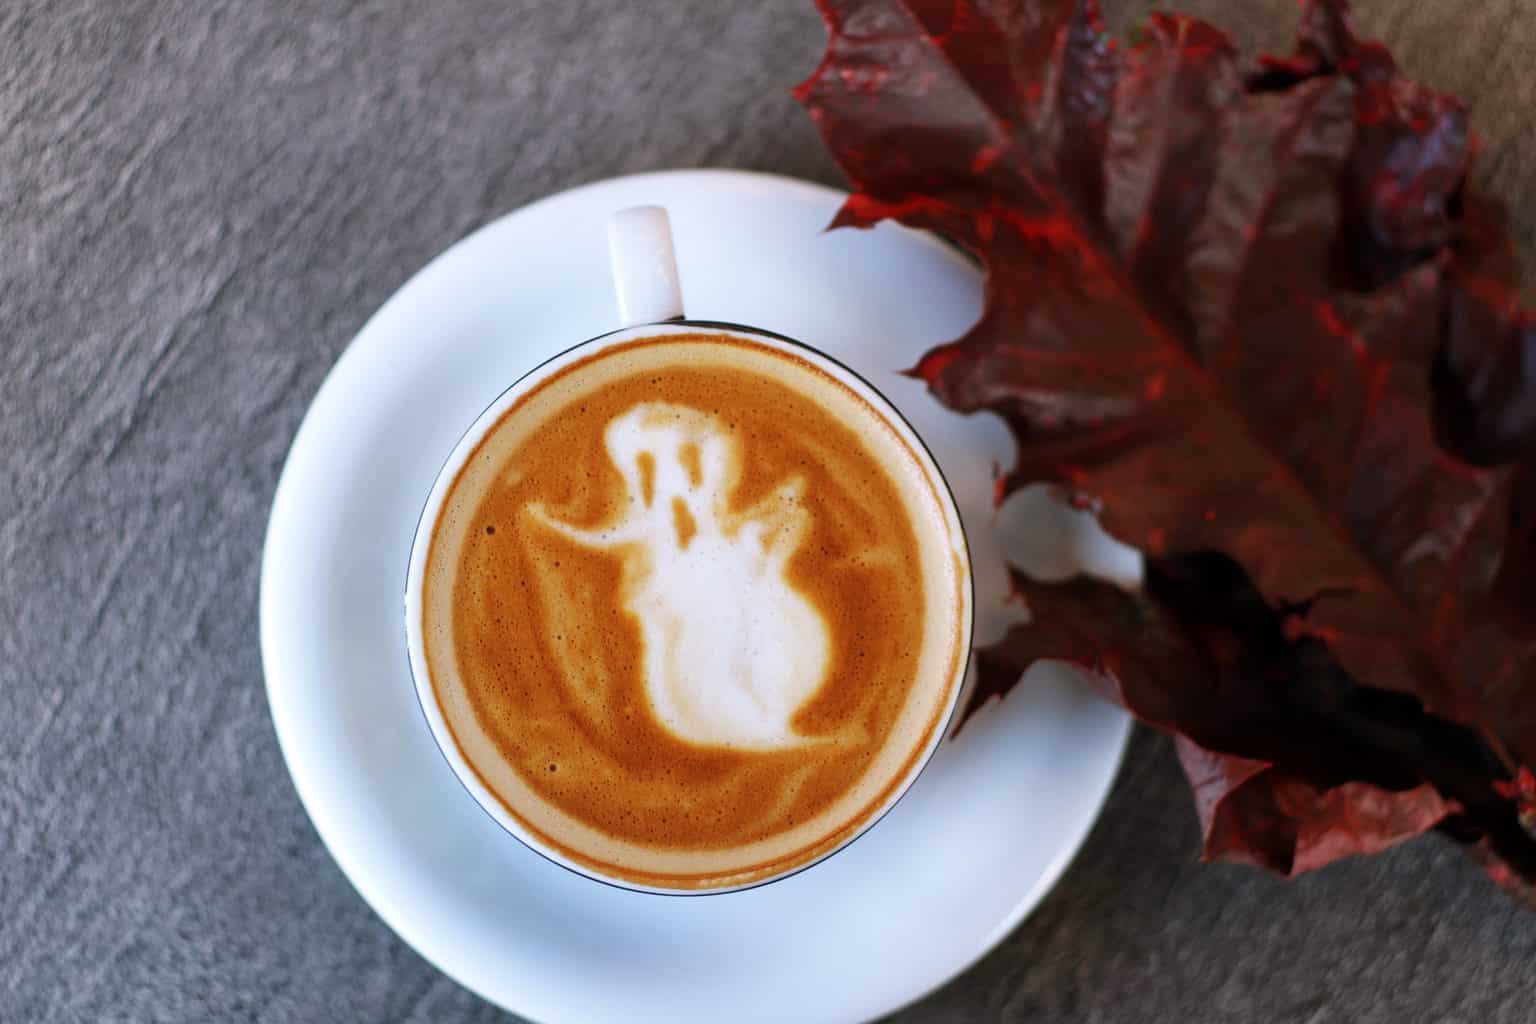 A coffee designed with a ghost shape